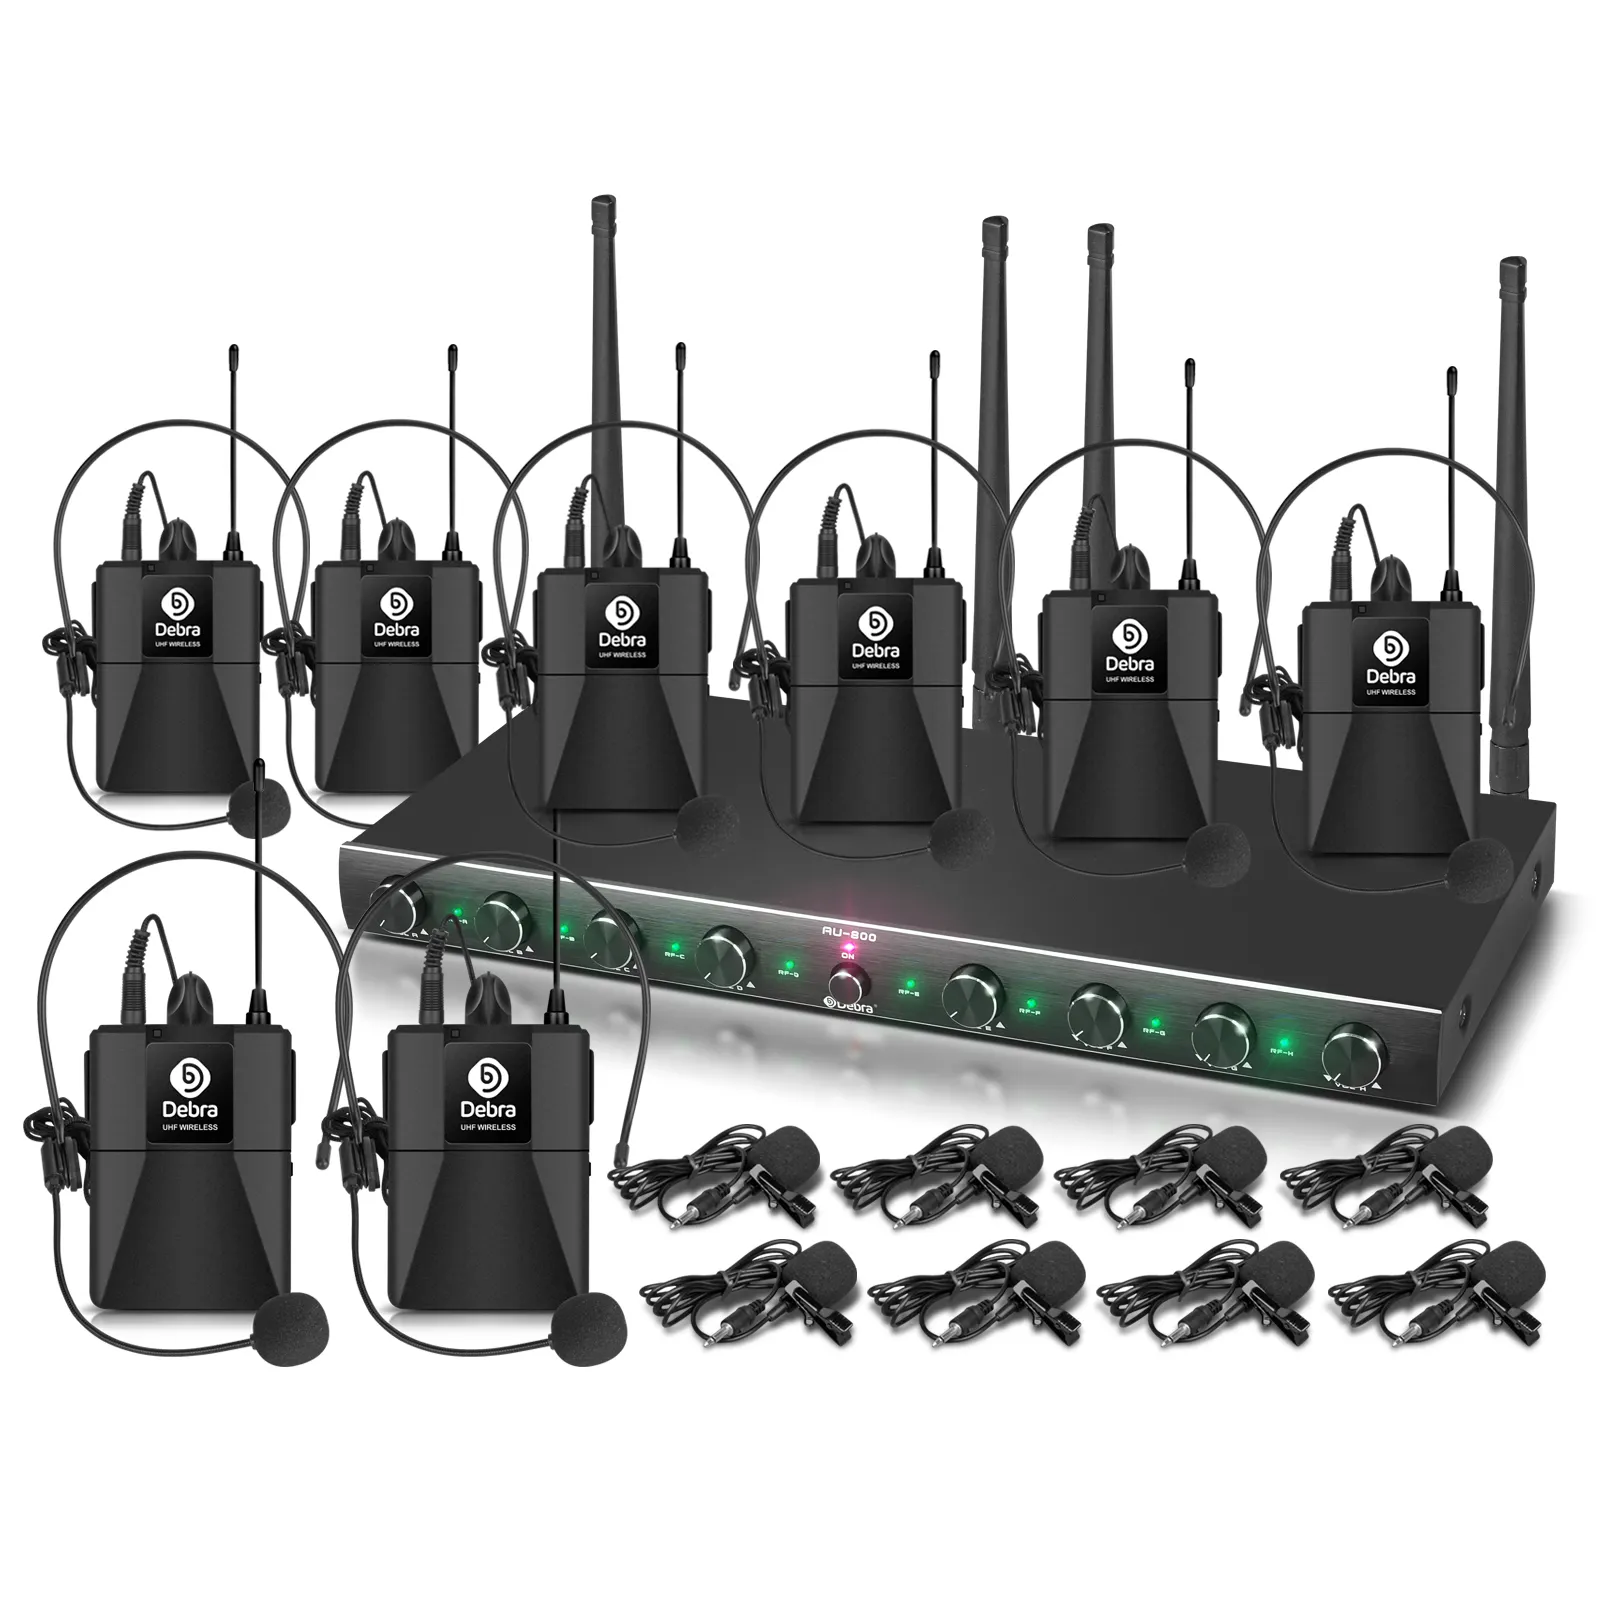 8 Channel UHF Wireless Microphone System Handheld/Lavalier/Headset mic for Karaoke Conference Presentation